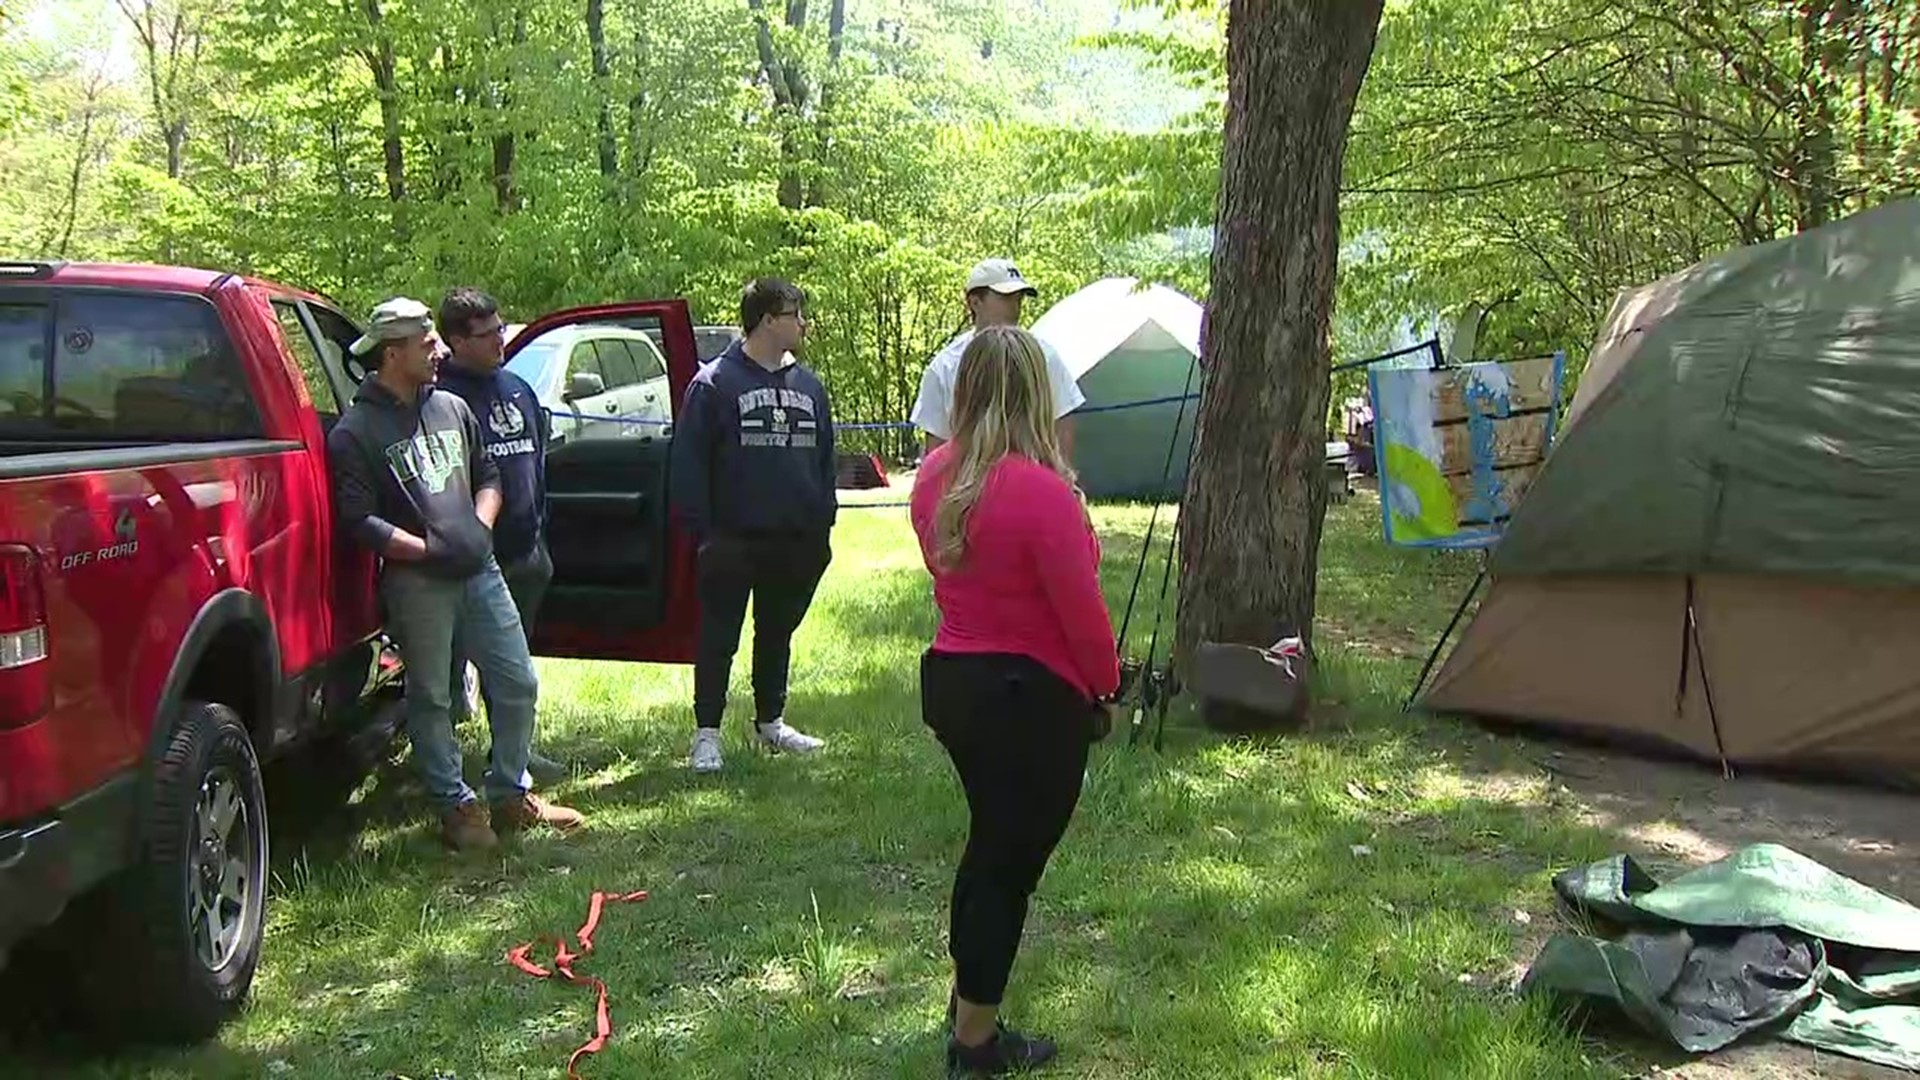 Campgrounds throughout our area gearing up for what's expected to be a busy holiday weekend and summer season.